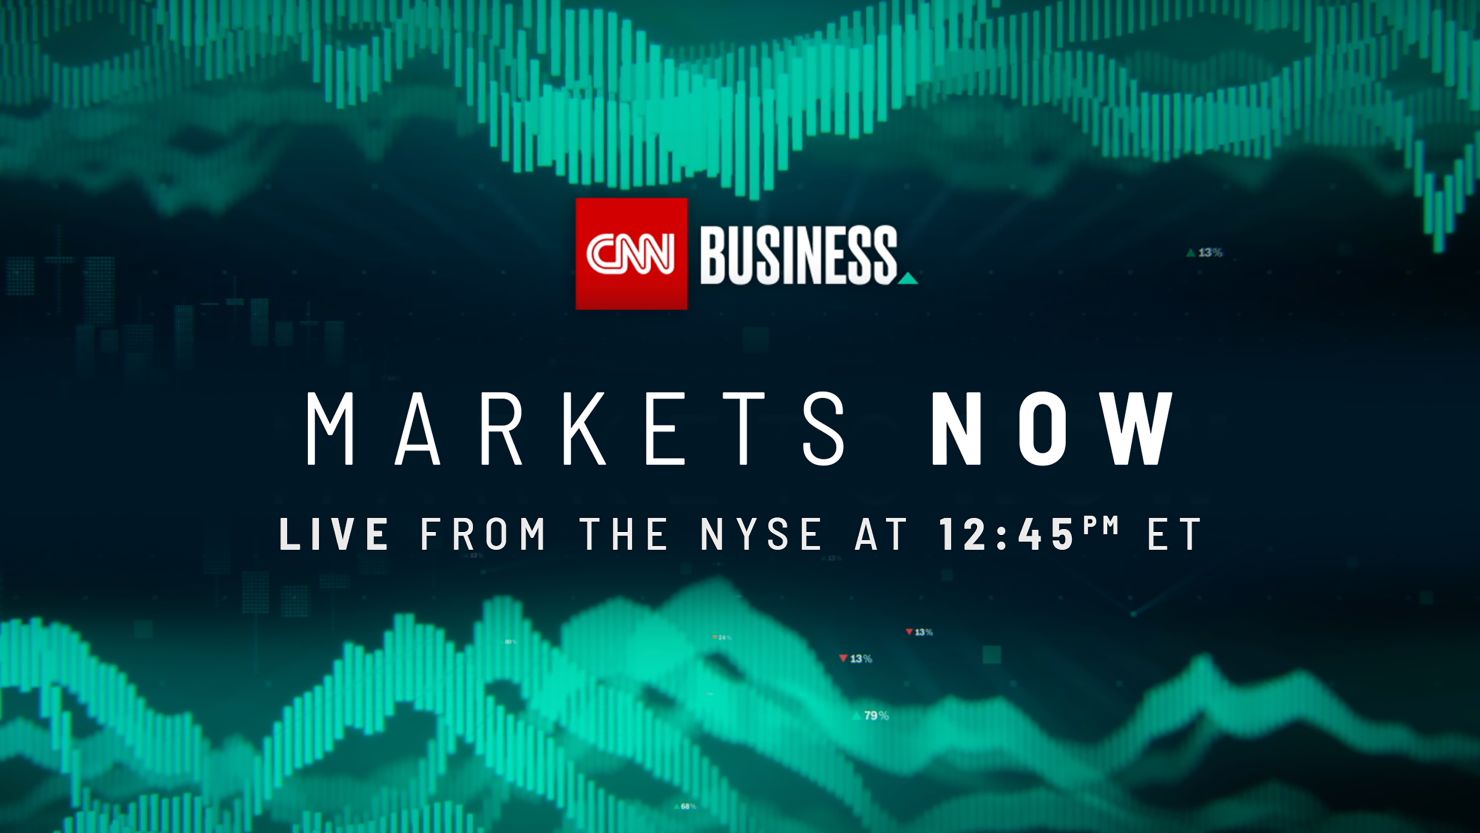 "Markets Now" streams live from the New York Stock Exchange every Wednesday at 12:45 p.m. ET